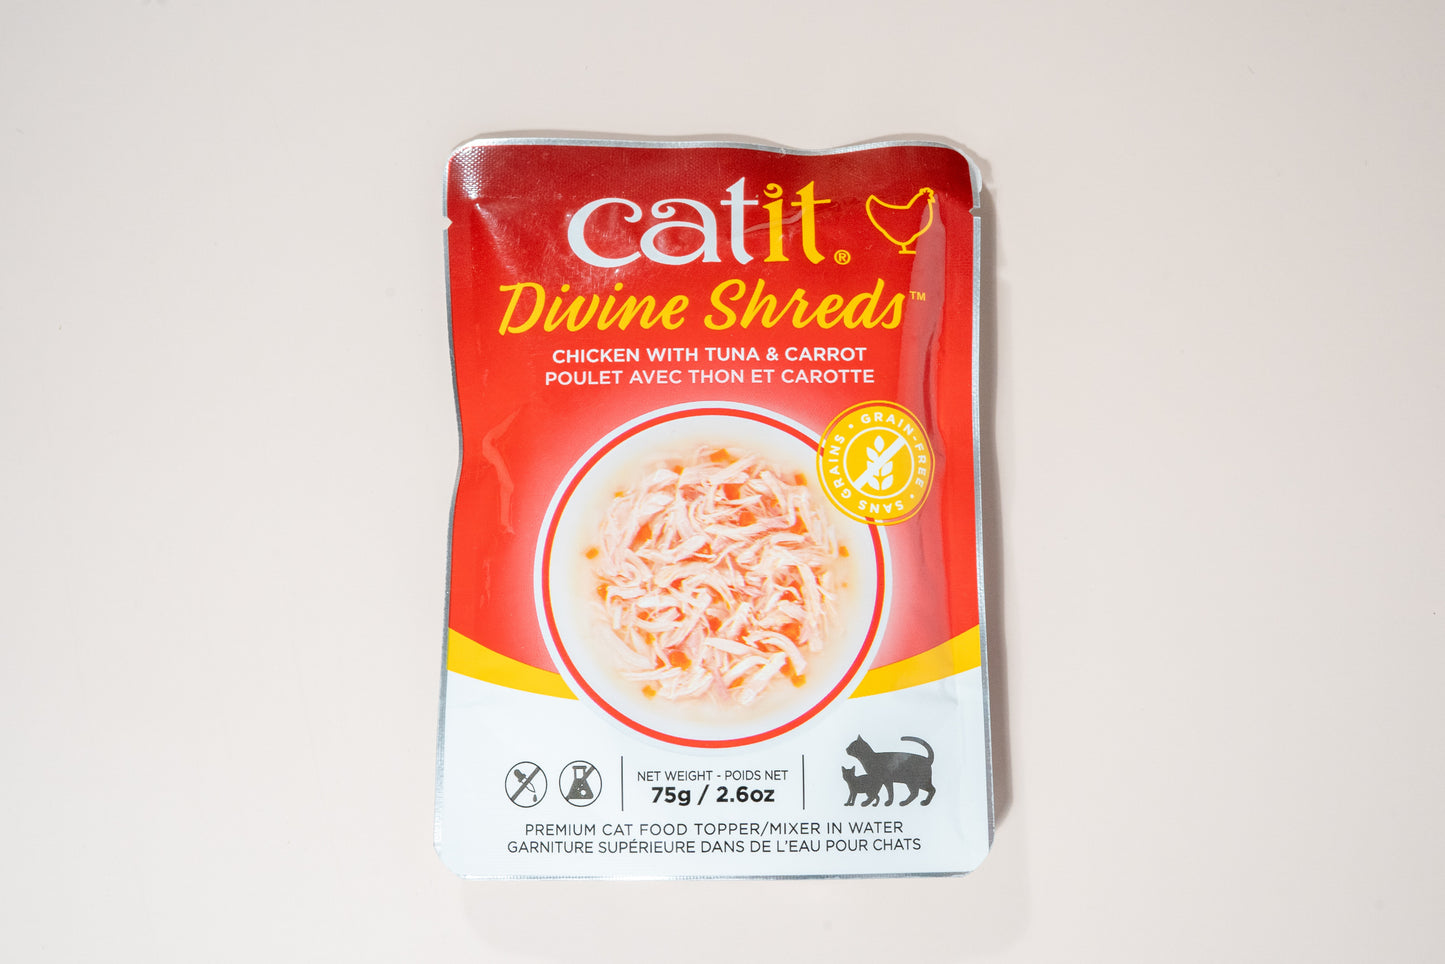 Front view of the Catit Divine Shreds food tooper in water with chicken, tuna and carrot flavor.